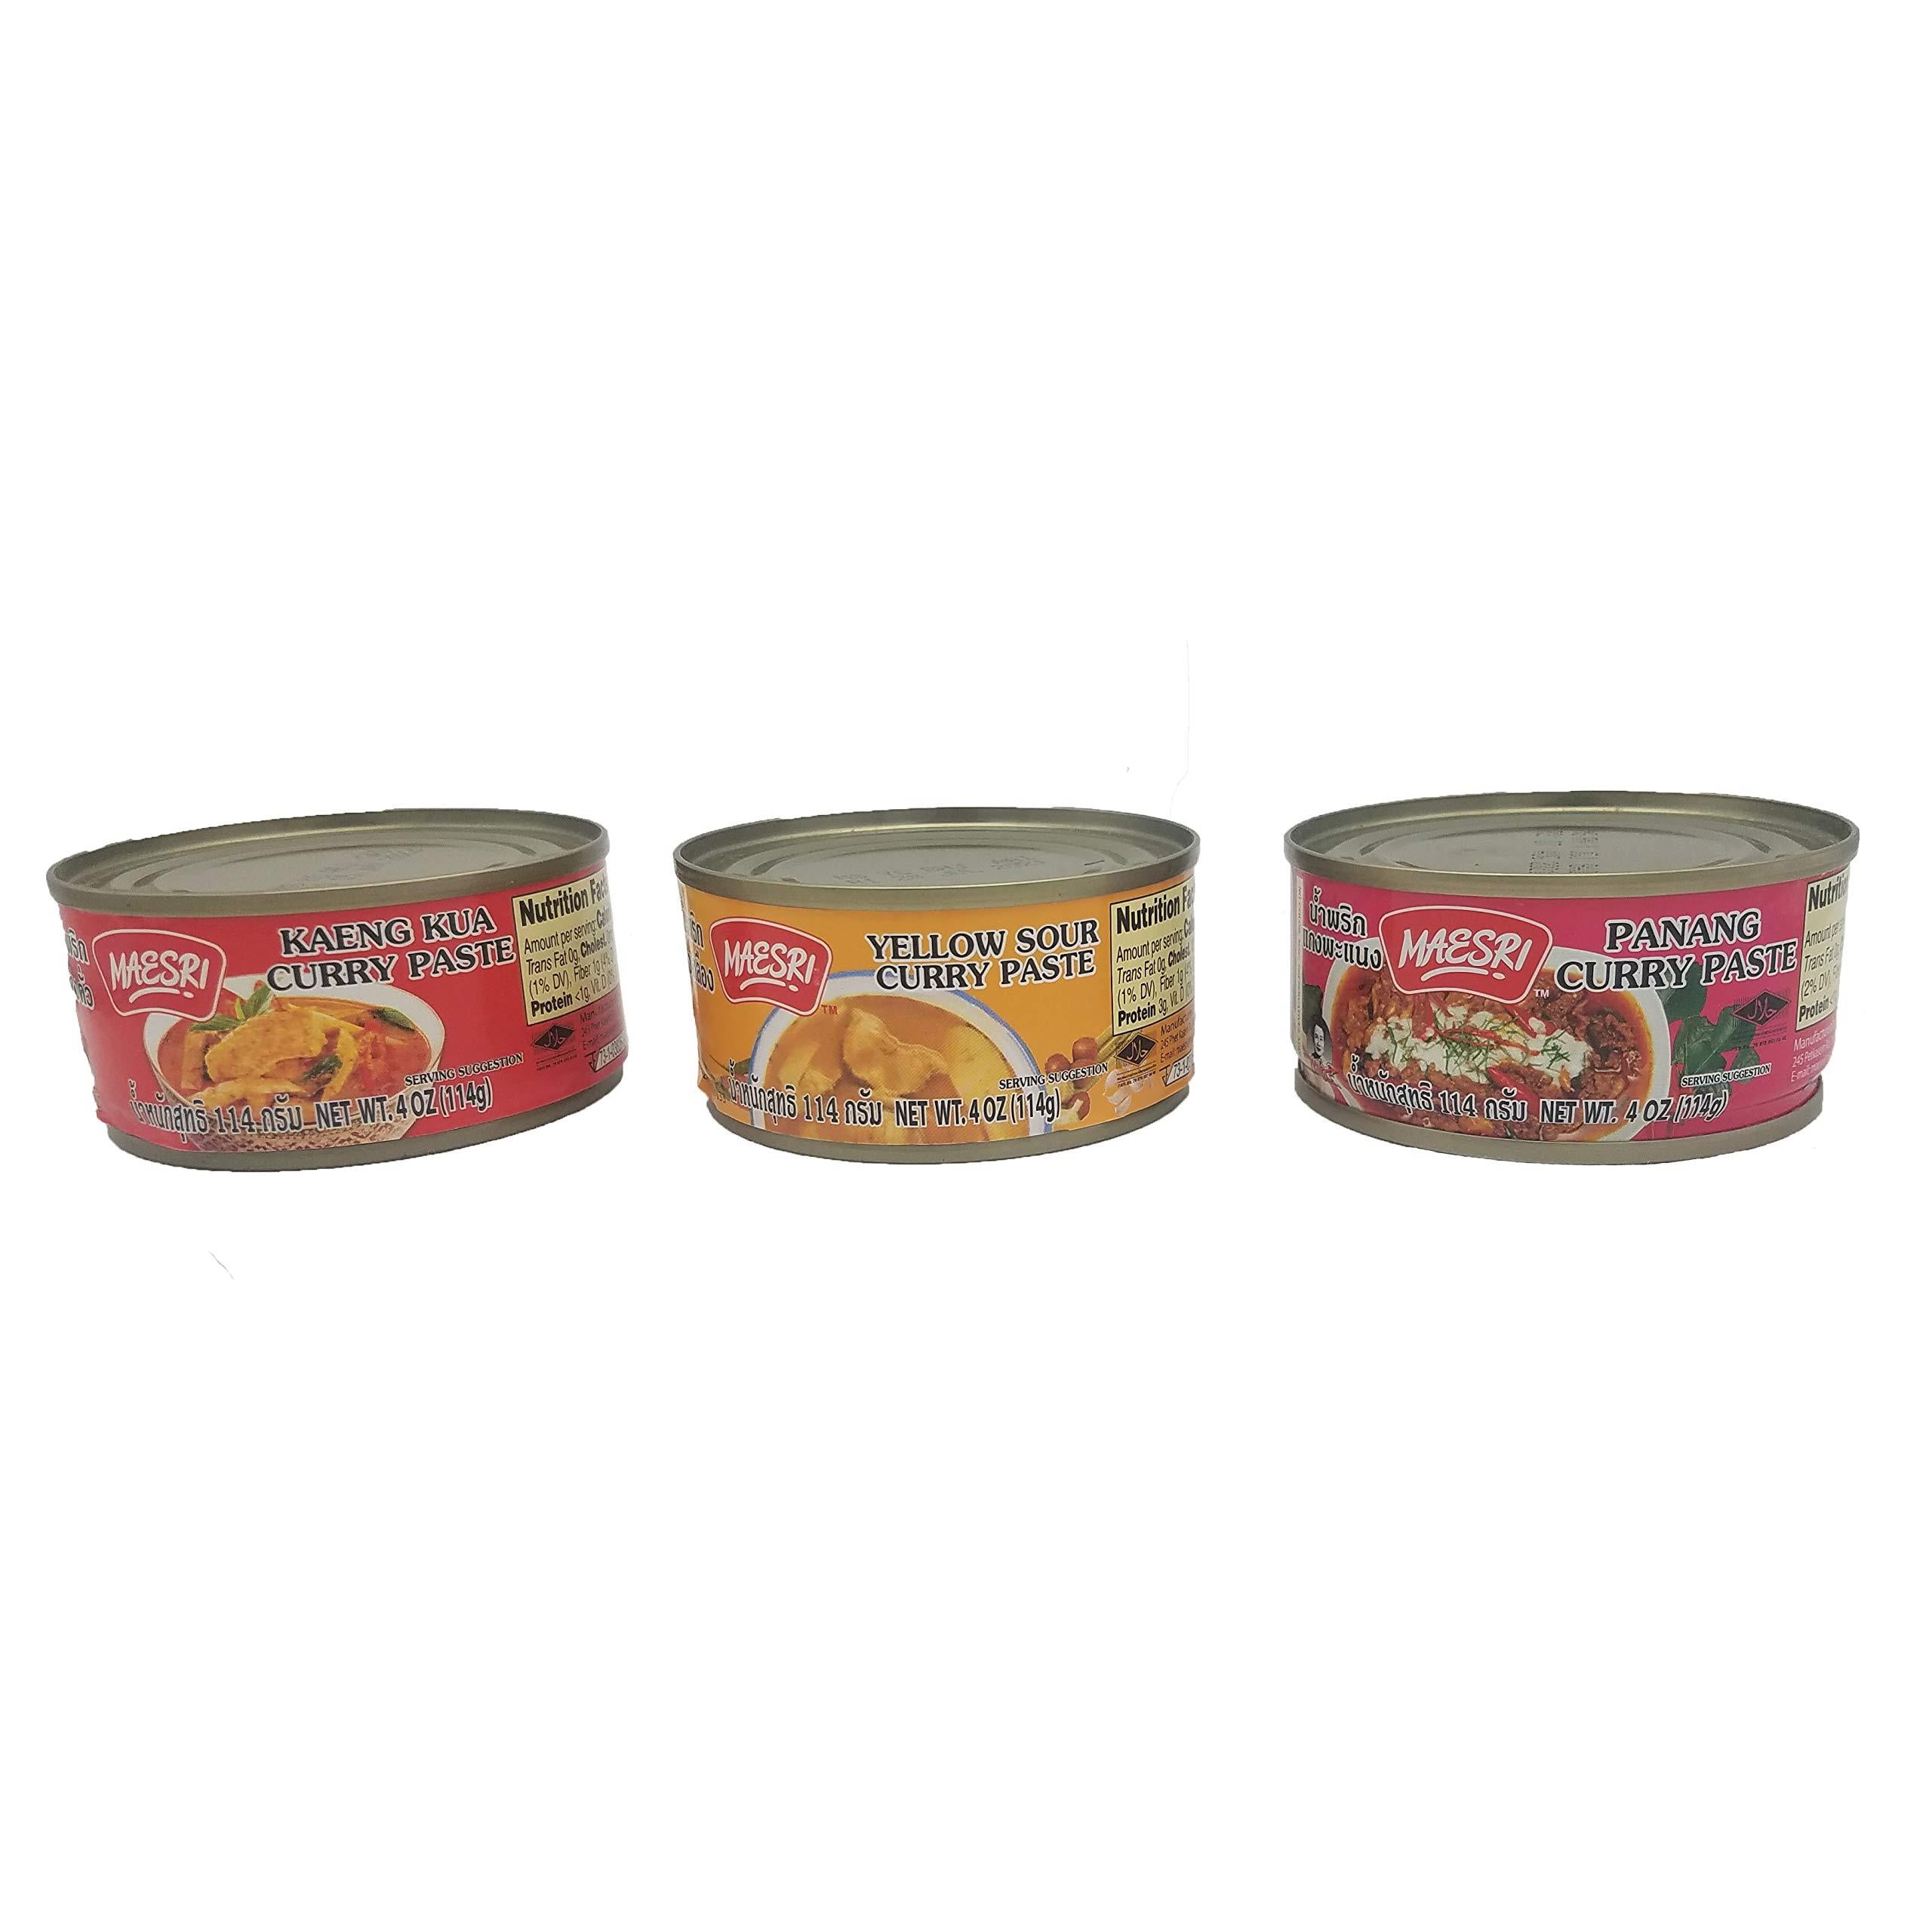 Maesri Curry Paste Variety Pack - Yellow, Panang and Kaeng Kua - Thai Paste Curry Assortment - One Can Each Flavor